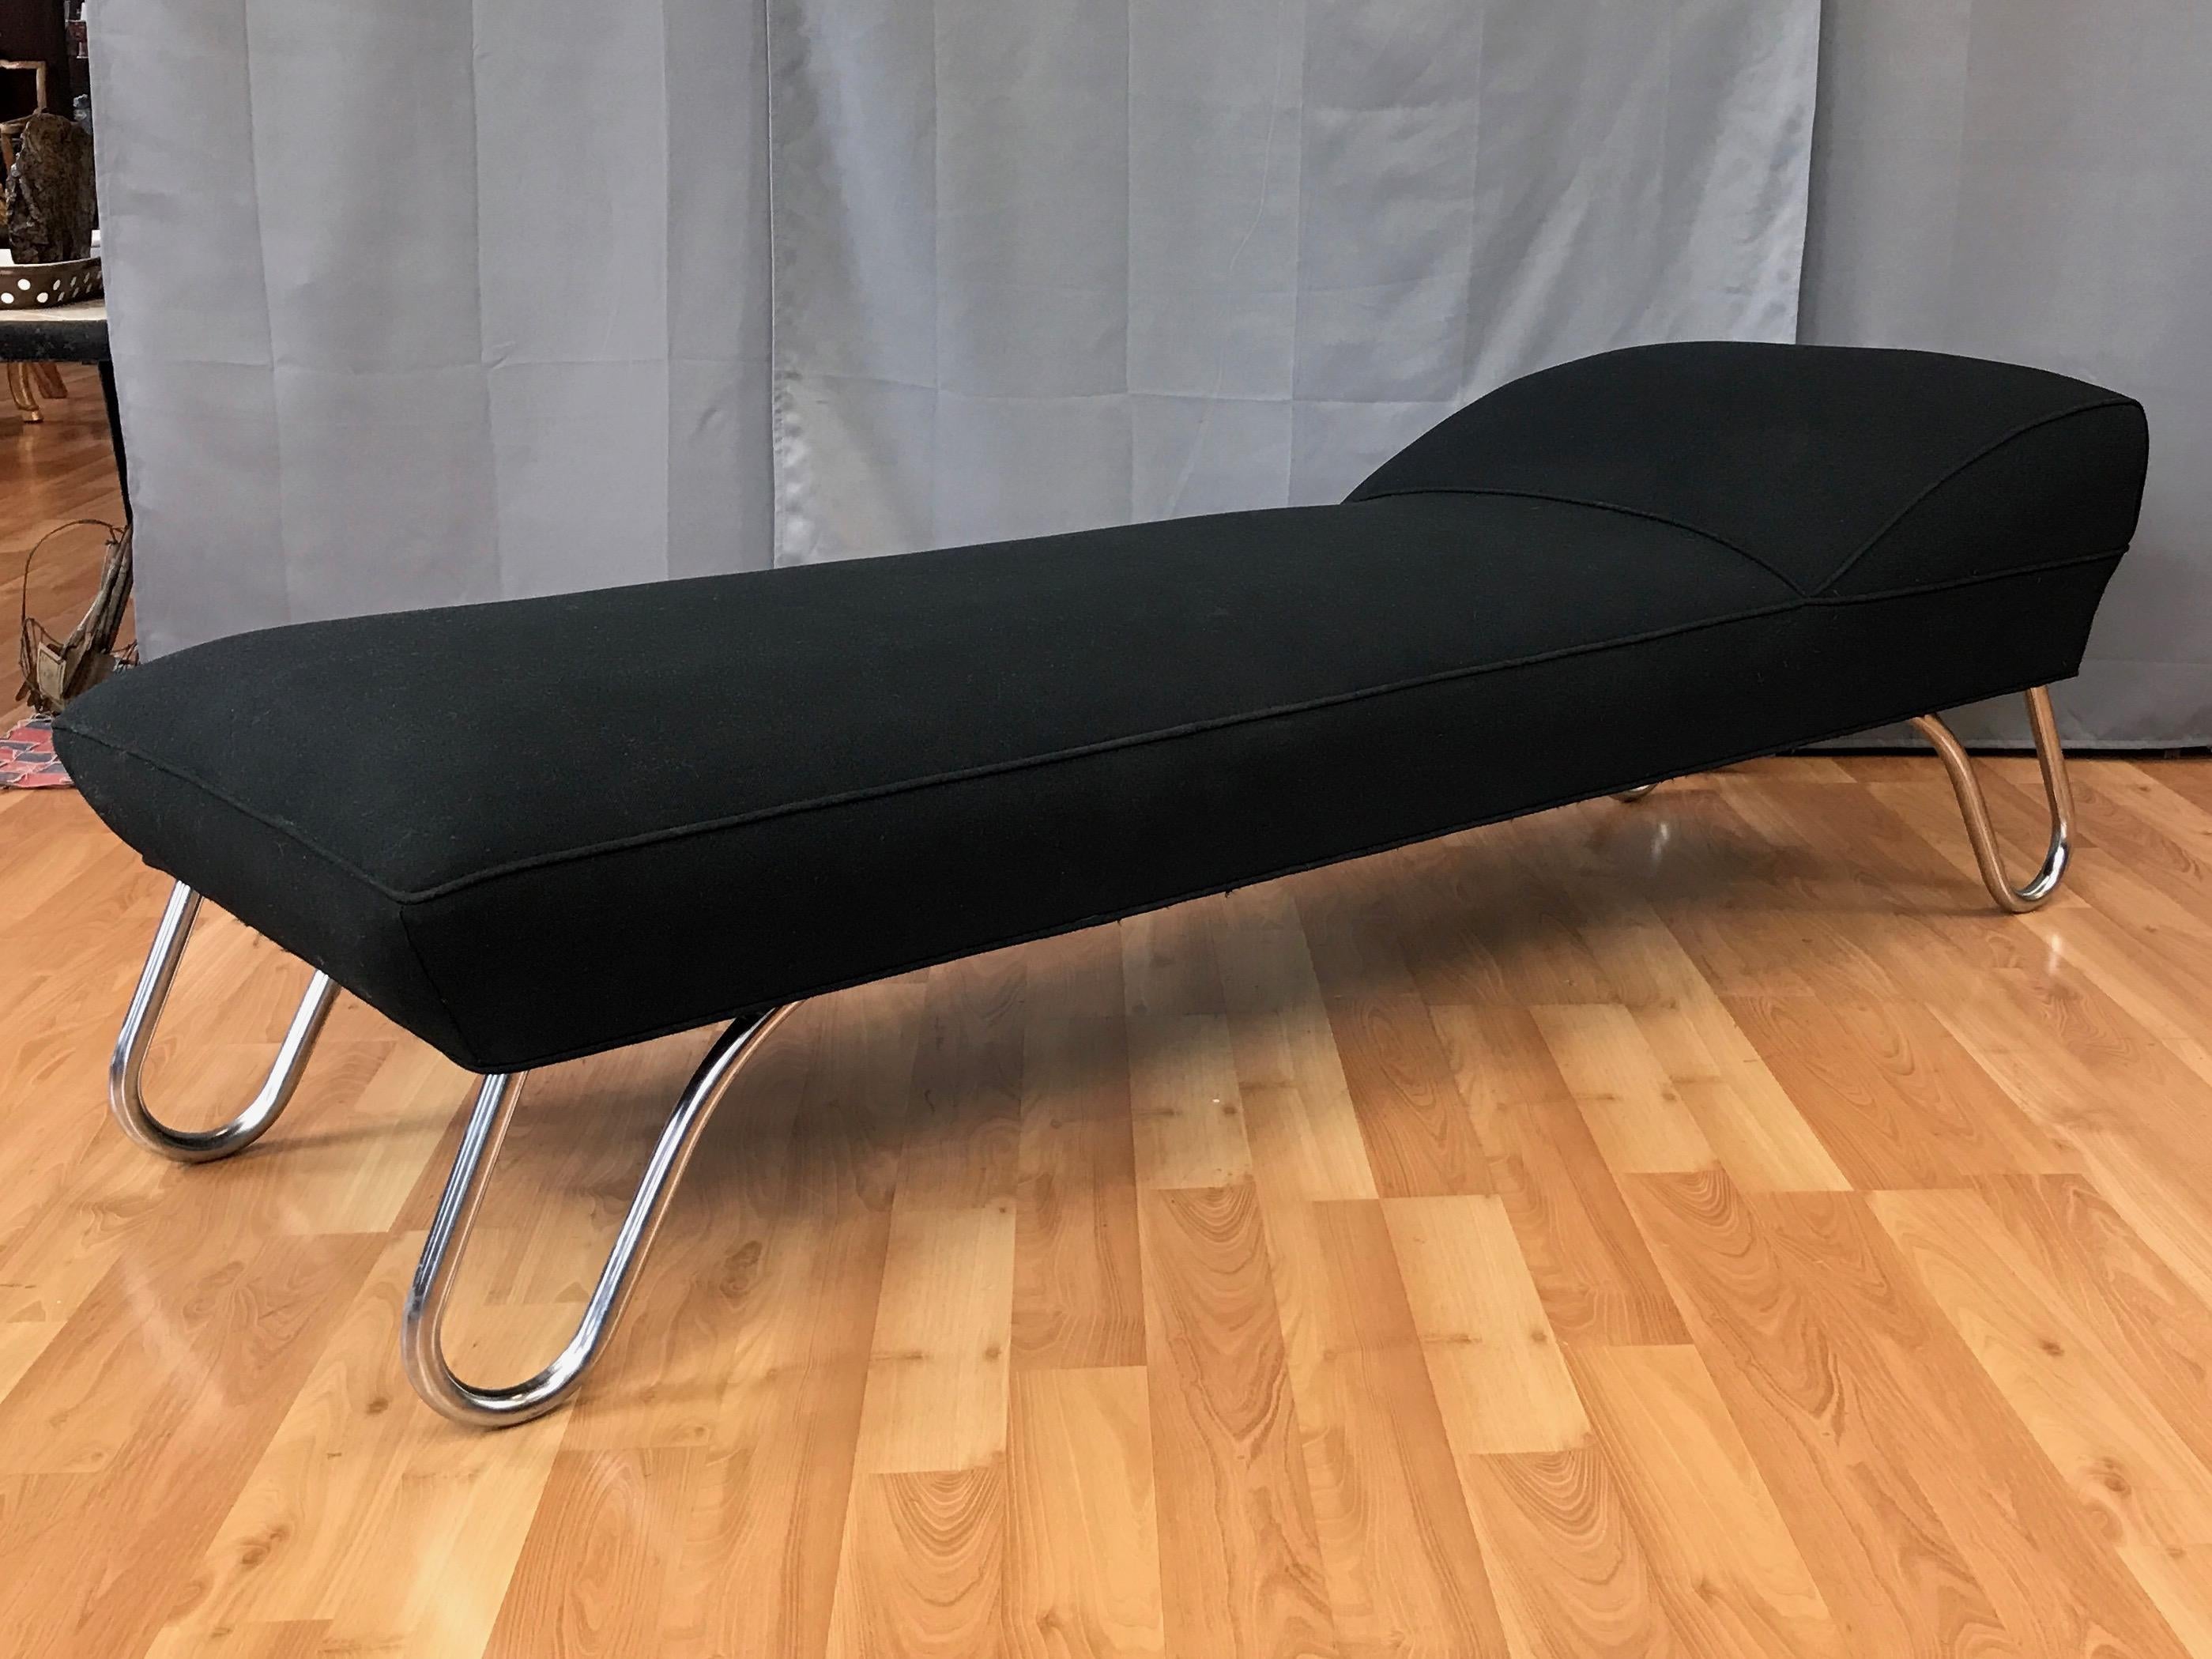 An early 1930s Streamline Moderne chaise lounge or daybed by Kem Weber for Lloyd Manufacturing Co.

A sleek yet comfortable piece displaying the horizontal lines and curving forms that exemplify the late Art Deco period Streamline Moderne style. On